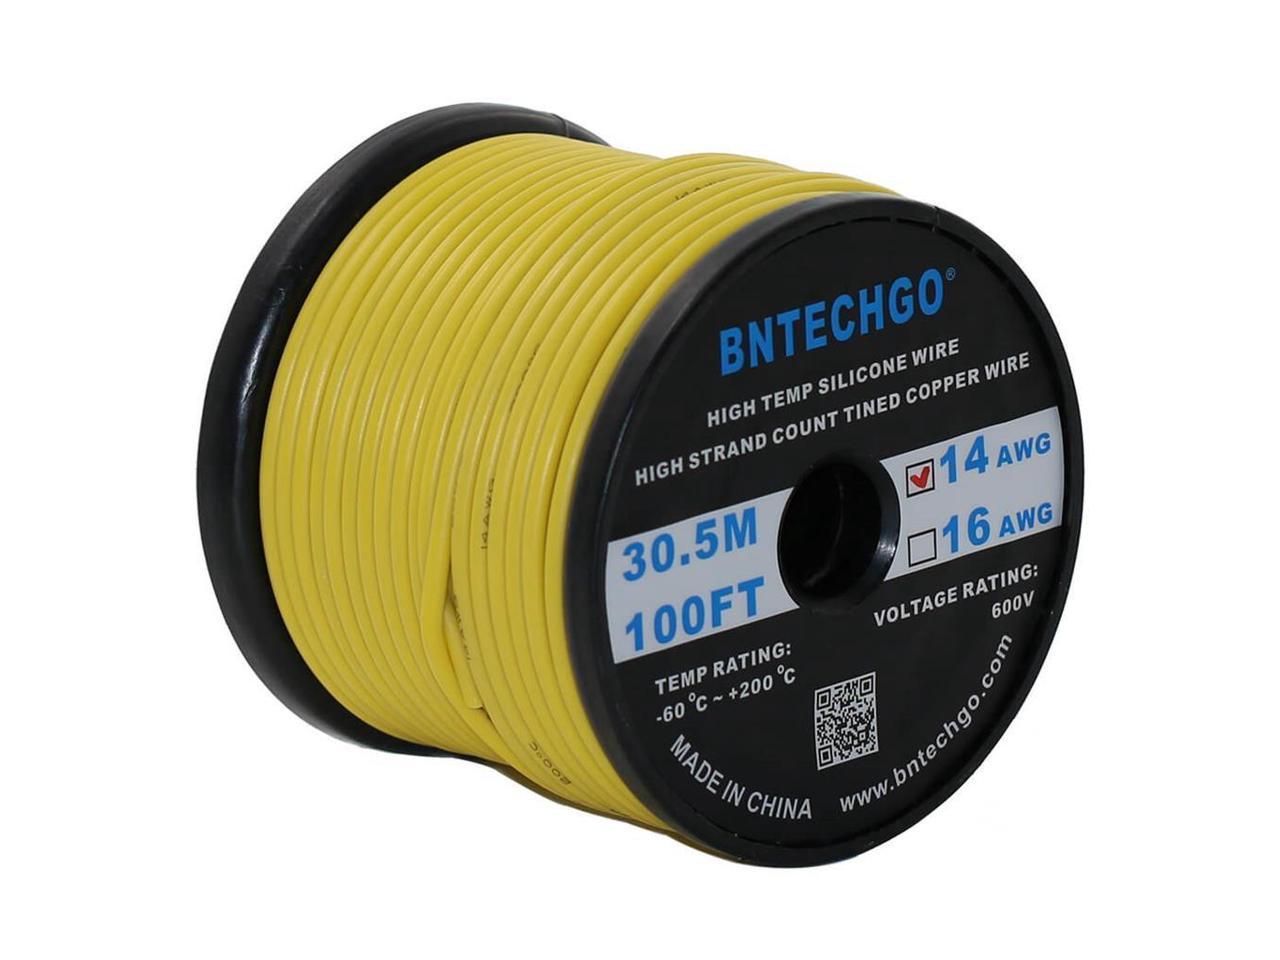 BNTECHGO Appliance Motor 14 AWG Gauge Silicone Tinned Copper Battery Cable Wire 